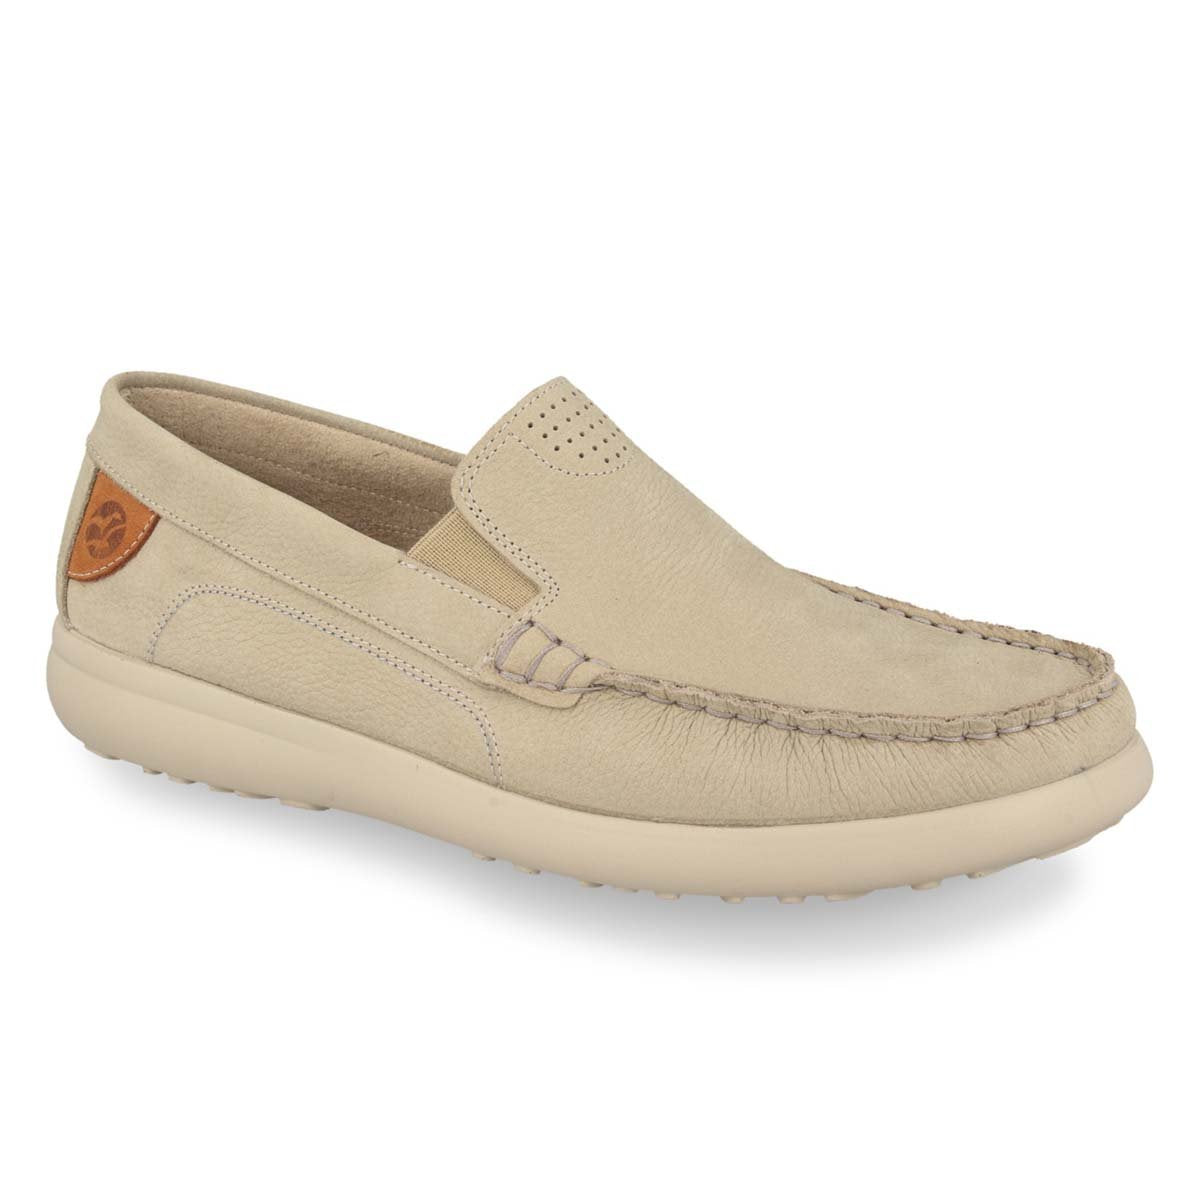 See the Leather Loafer Men Shoes in the colour BEIGE, available in various sizes